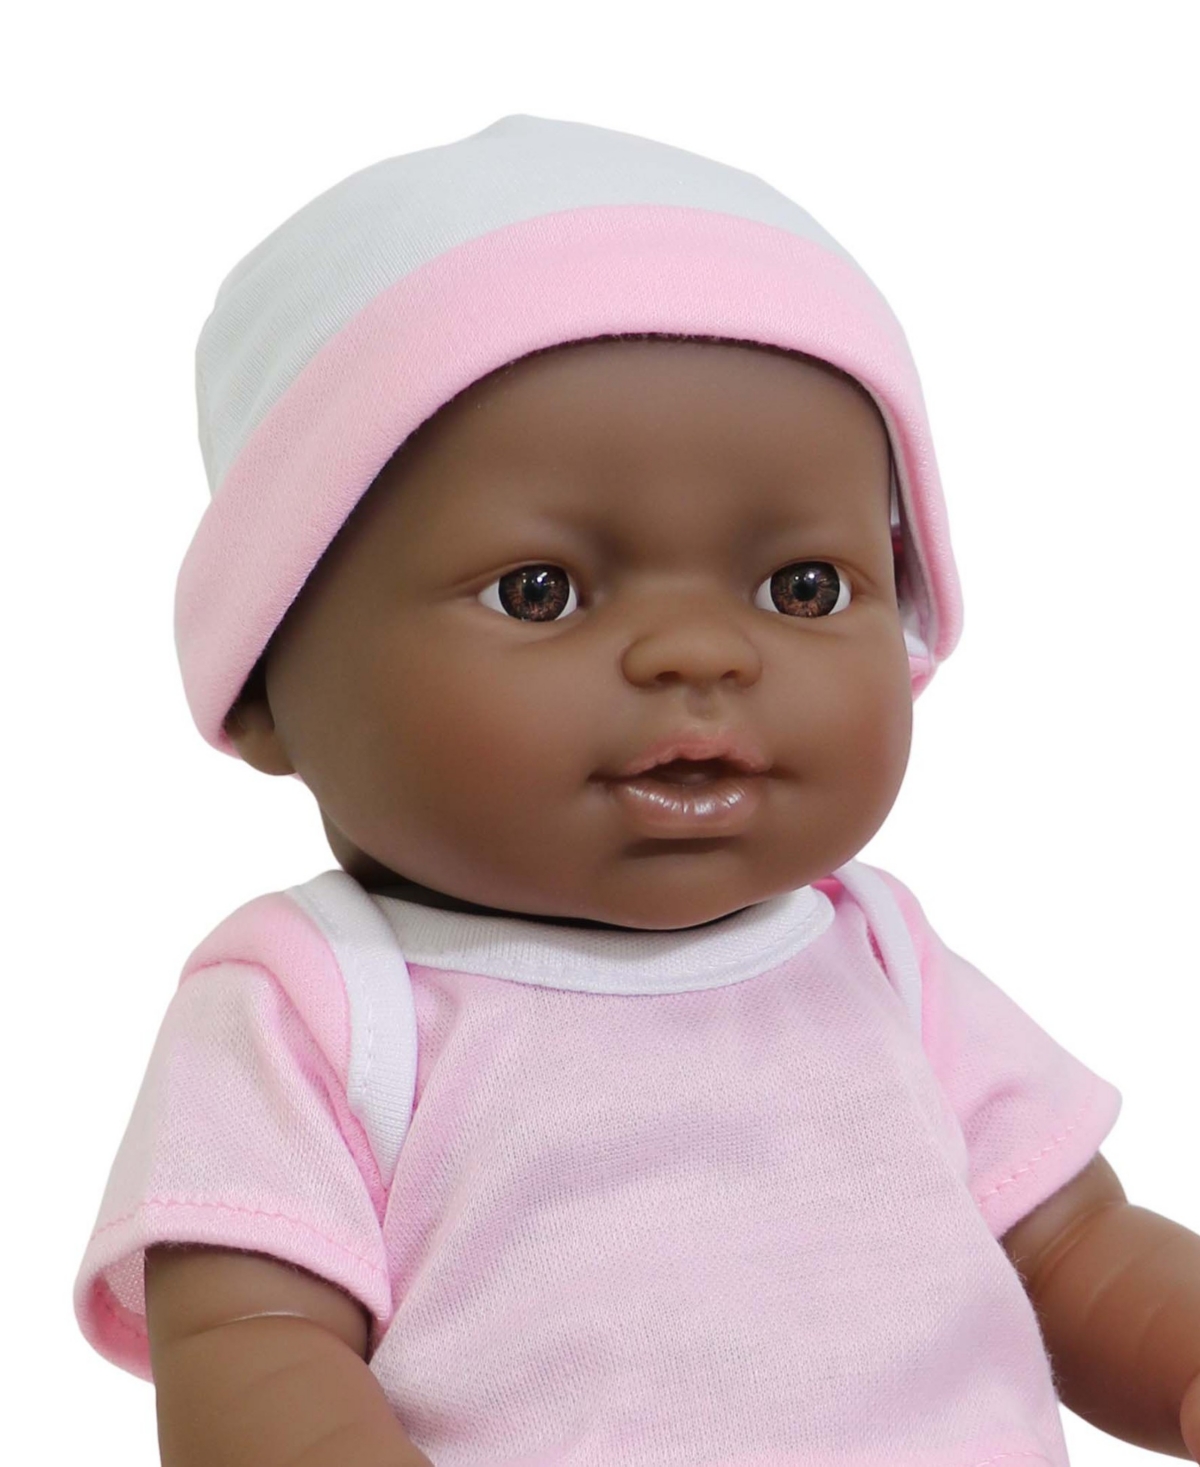 Shop Jc Toys La Newborn African American 12" Baby Doll Gift Set, 25 Pieces In Pink